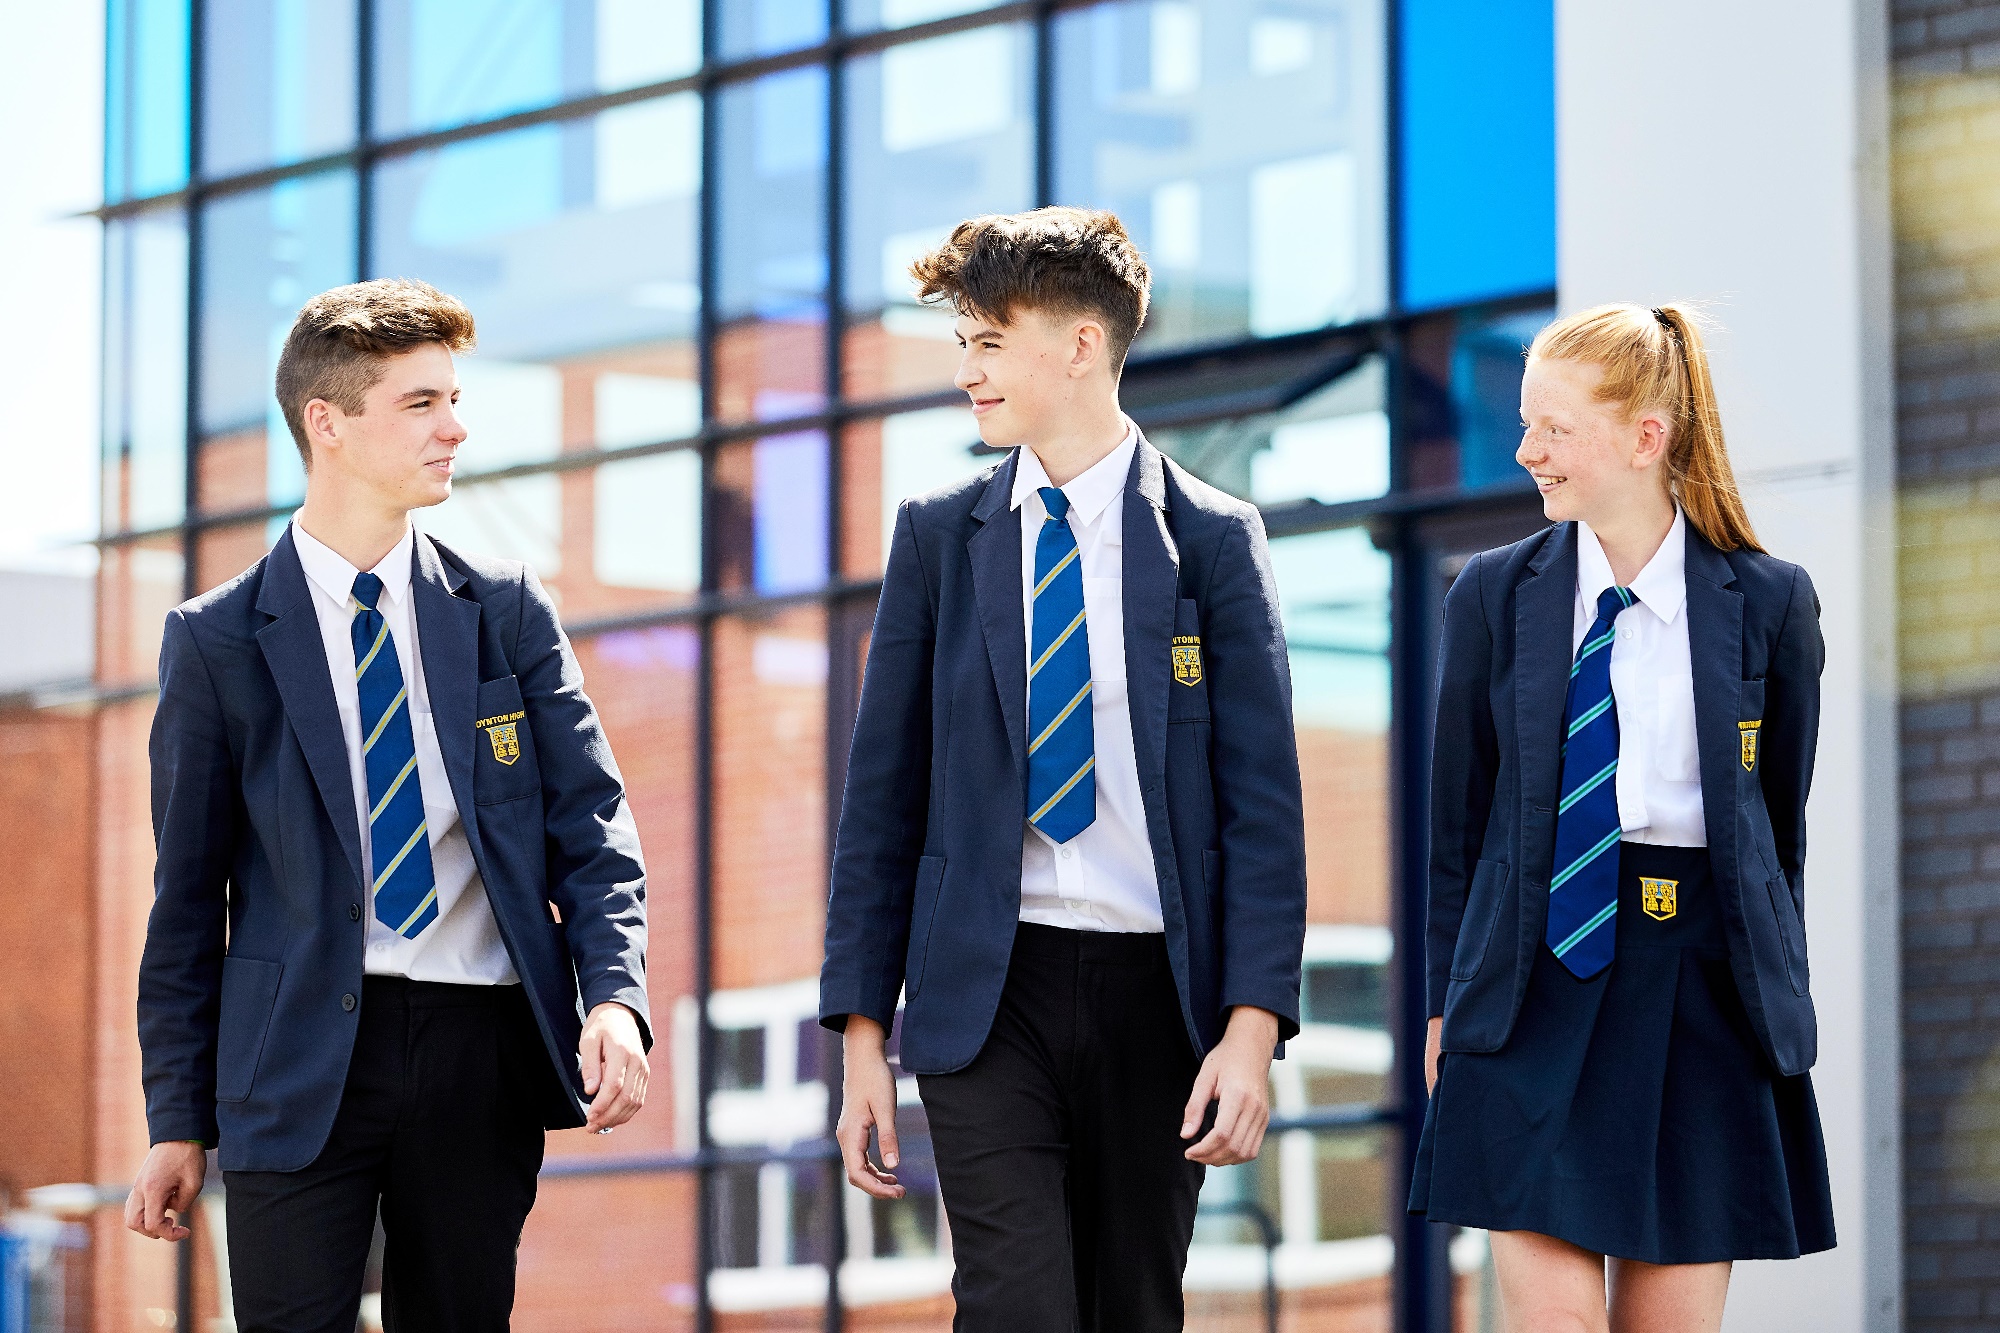 Boys in high school choose to wear skirts after management bans them from wearing shorts in high temperatures